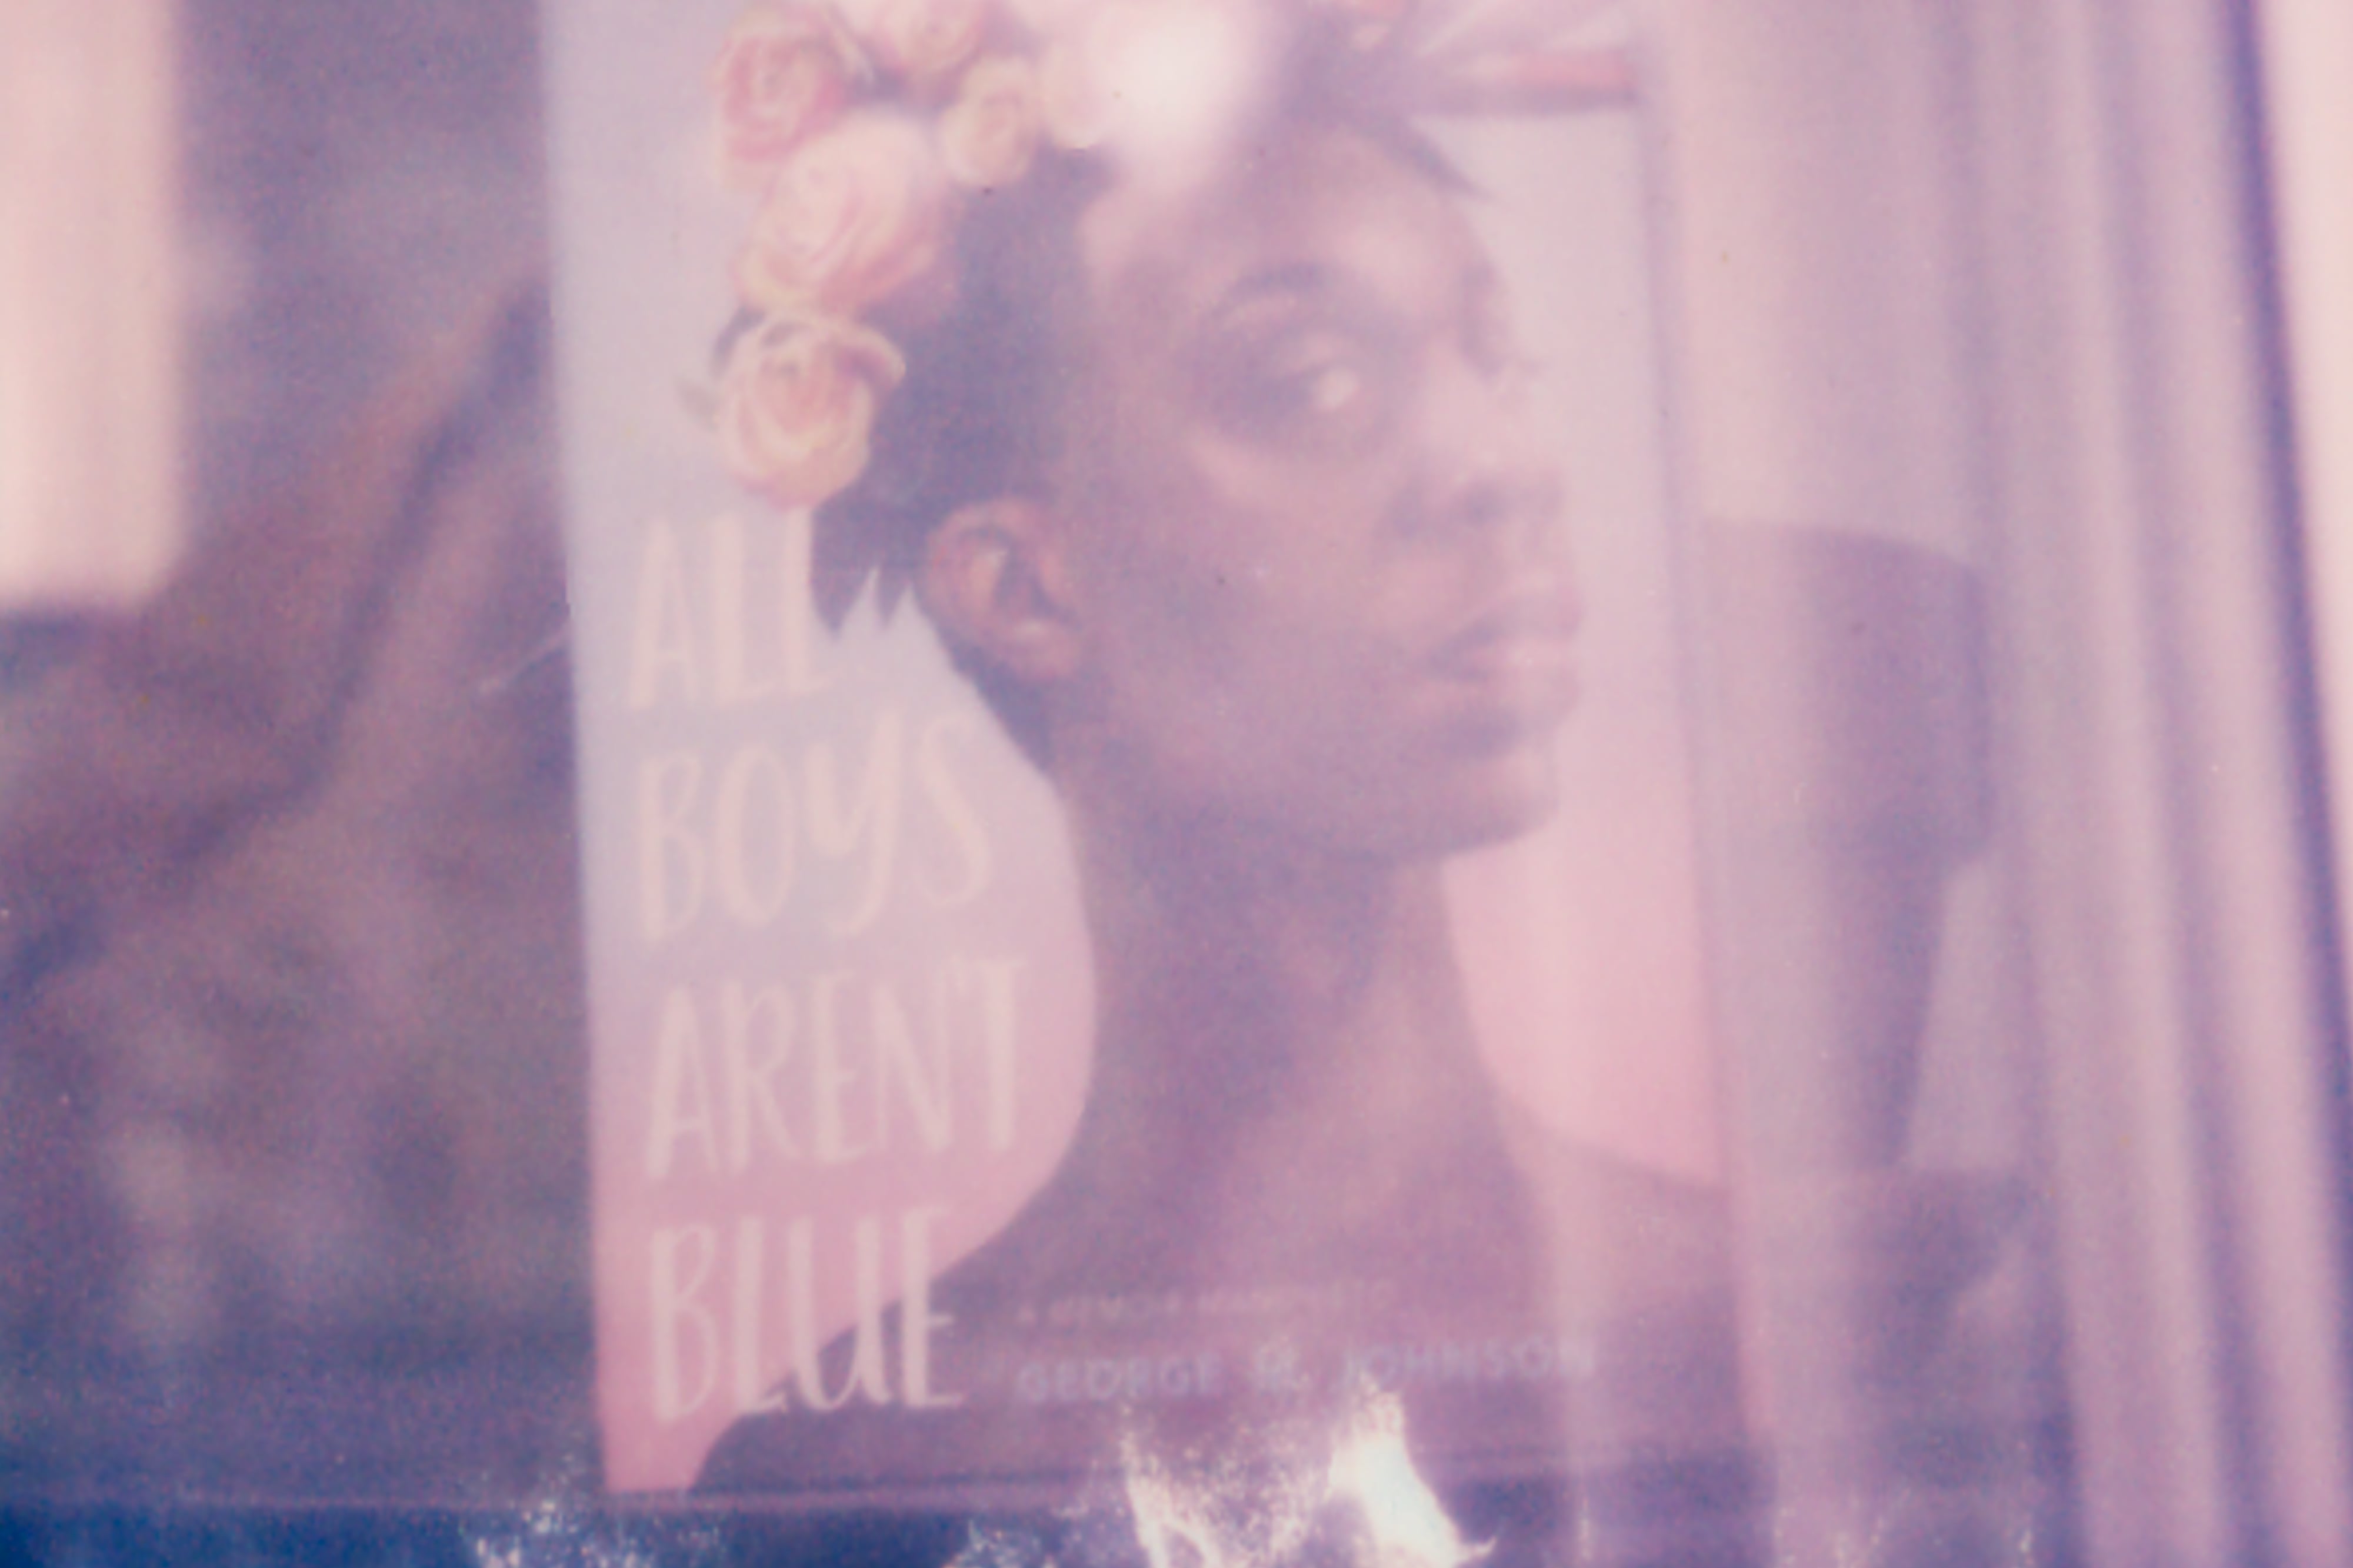 The book “All Boys Aren’t Blue” by George M. Johnson sits in a windowsill, the cover showing a Black man posing with a bouquet of flowers on his head.